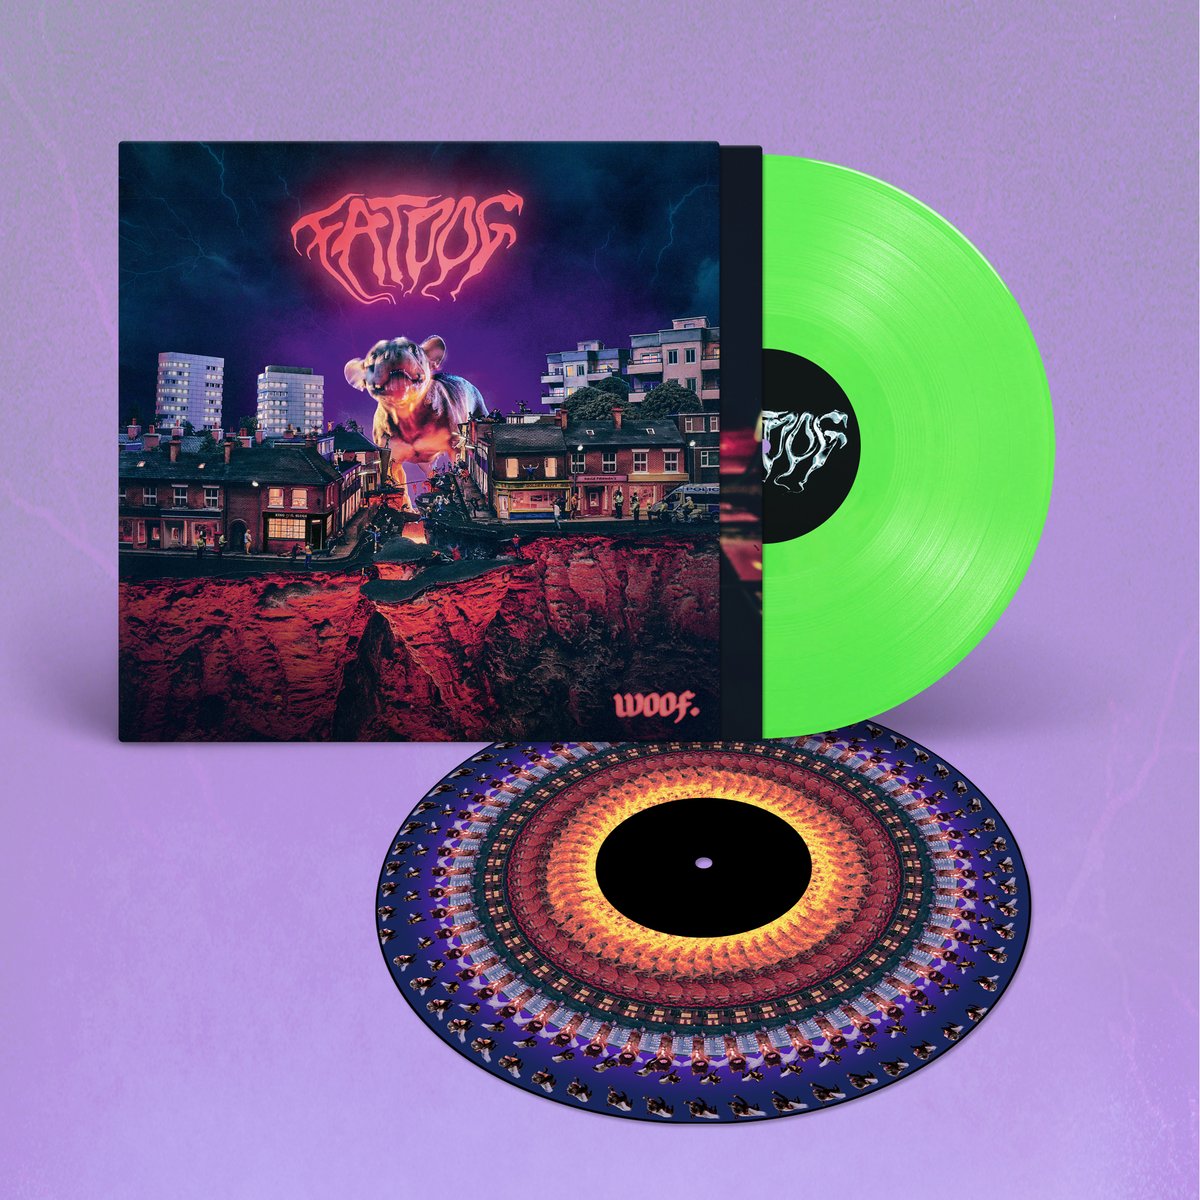 PRE SALE @dinkededition #293 @FATDOGBAND - 'WOOF.' ● Neon green vinyl * ● Card phenakistoscope * ● Numbered edition * ● Limited pressing of 600 * actionrecords.co.uk/buy/woof-dinke…